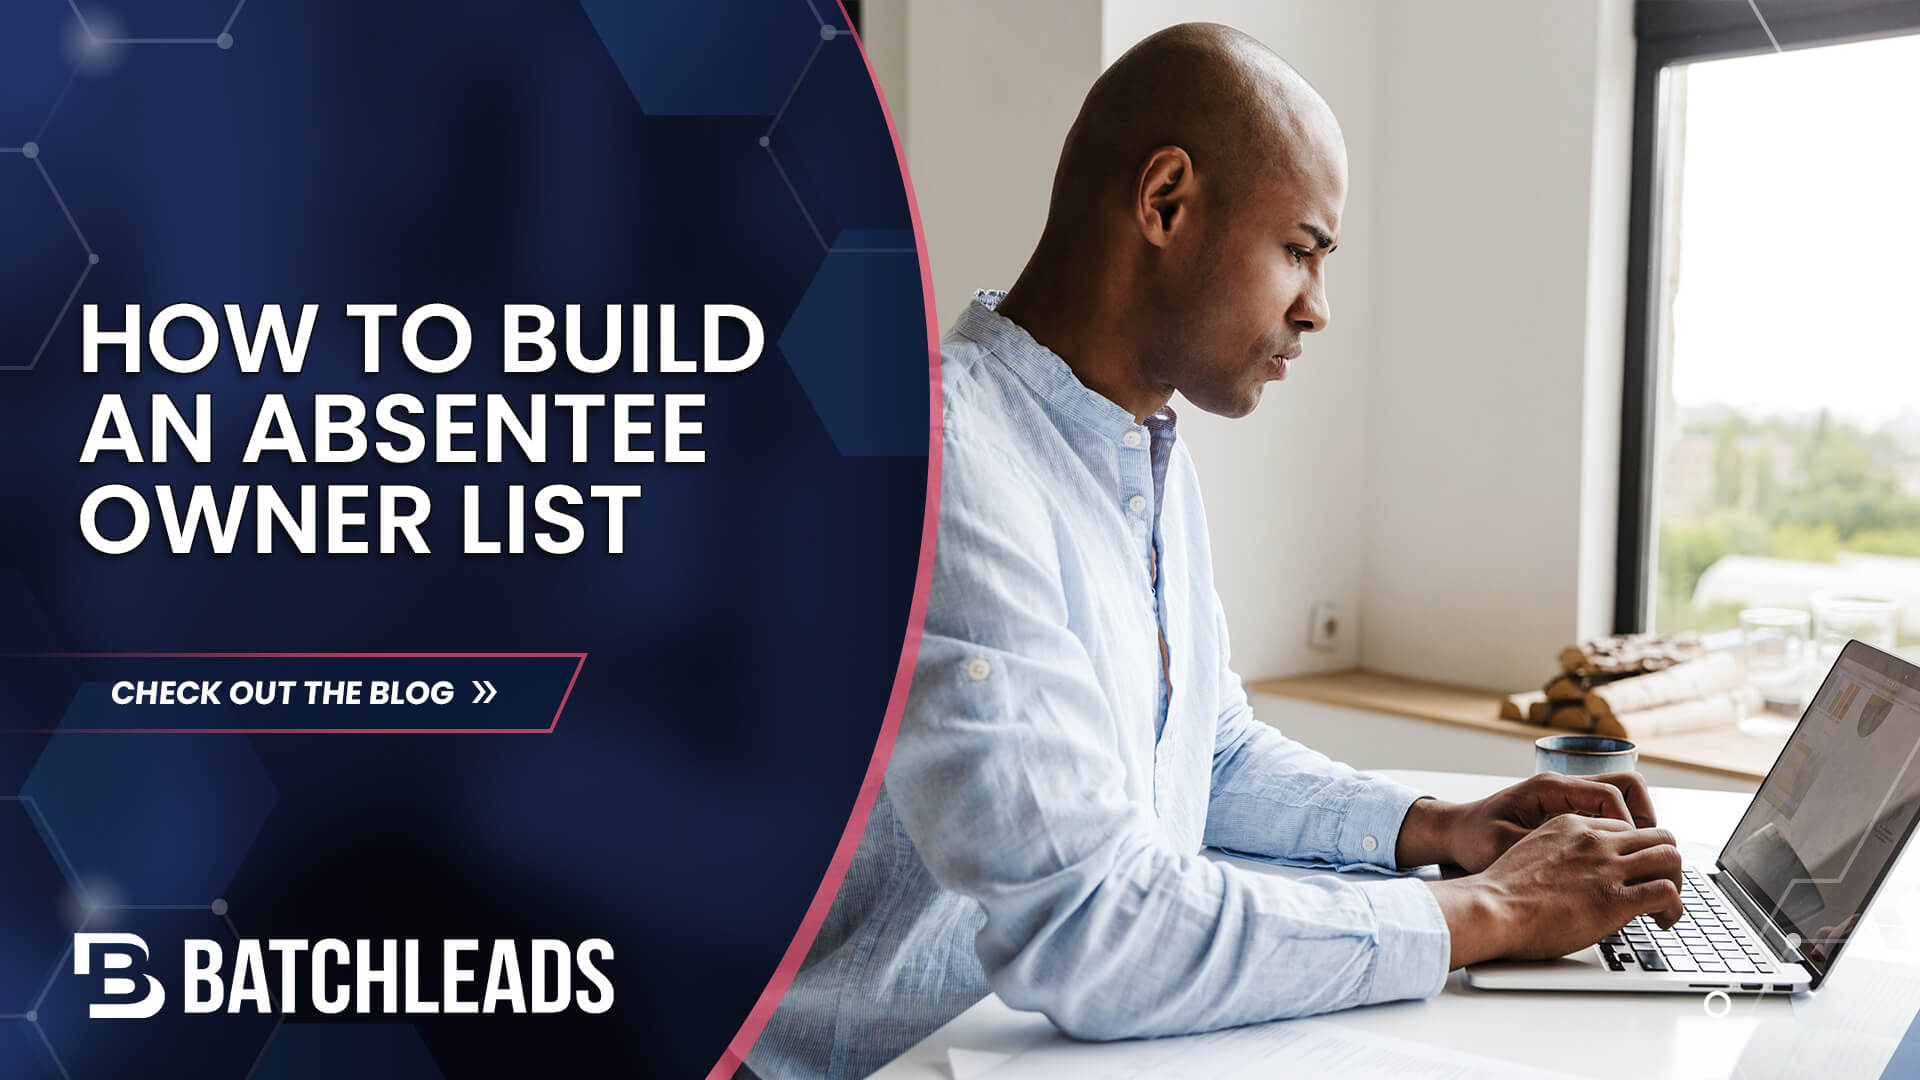 How to build an absentee owner list with batchleads